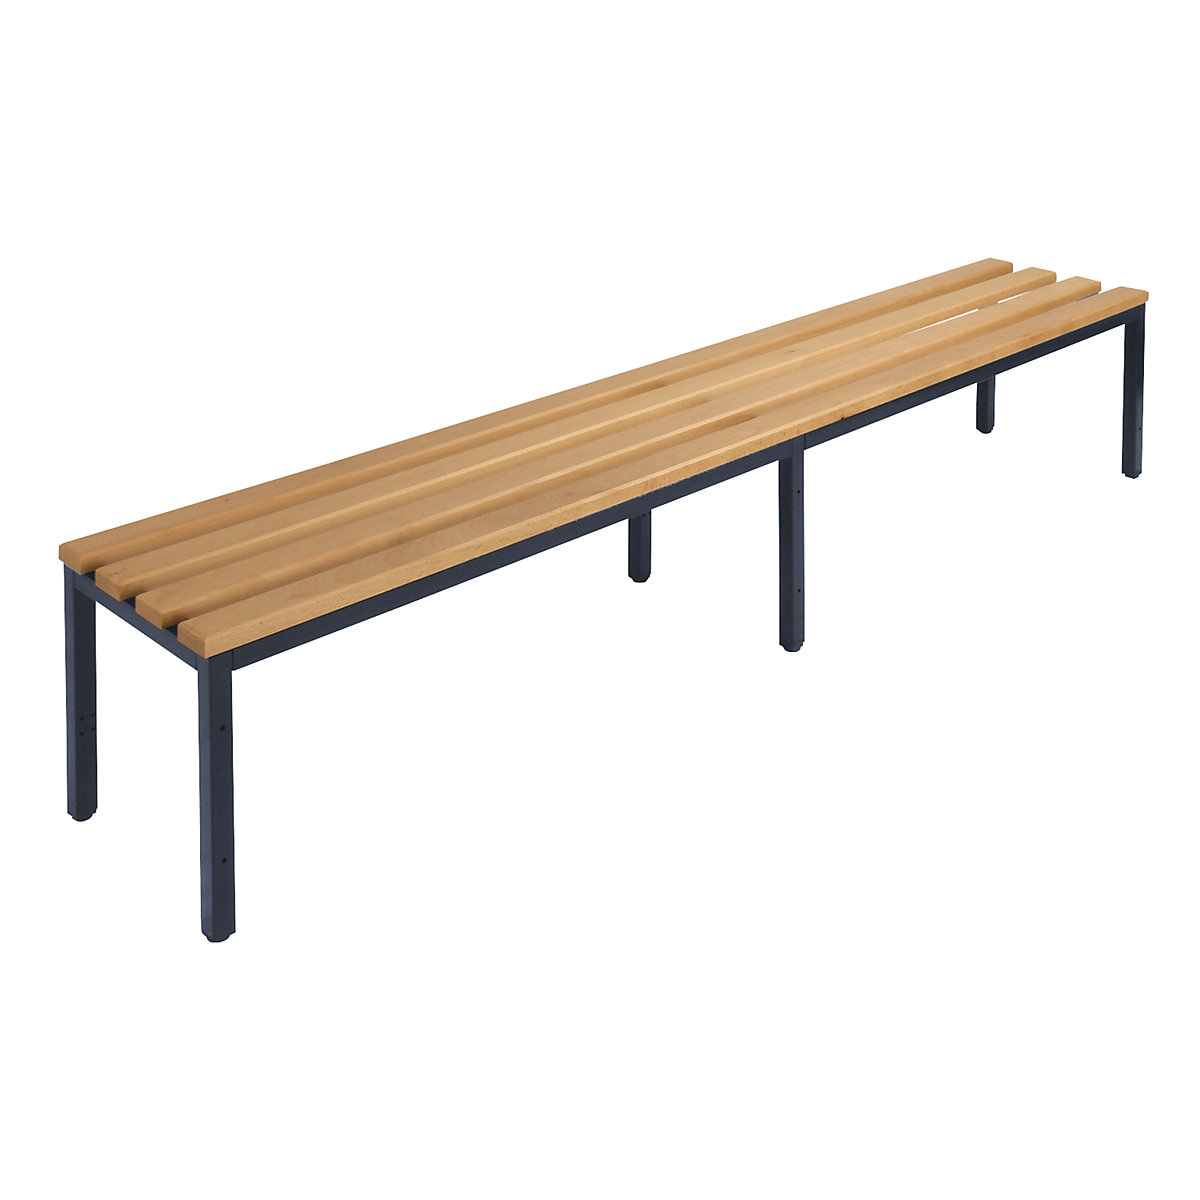 Wolf – Cloakroom bench without back rest, beech wood slats, length 2000 mm